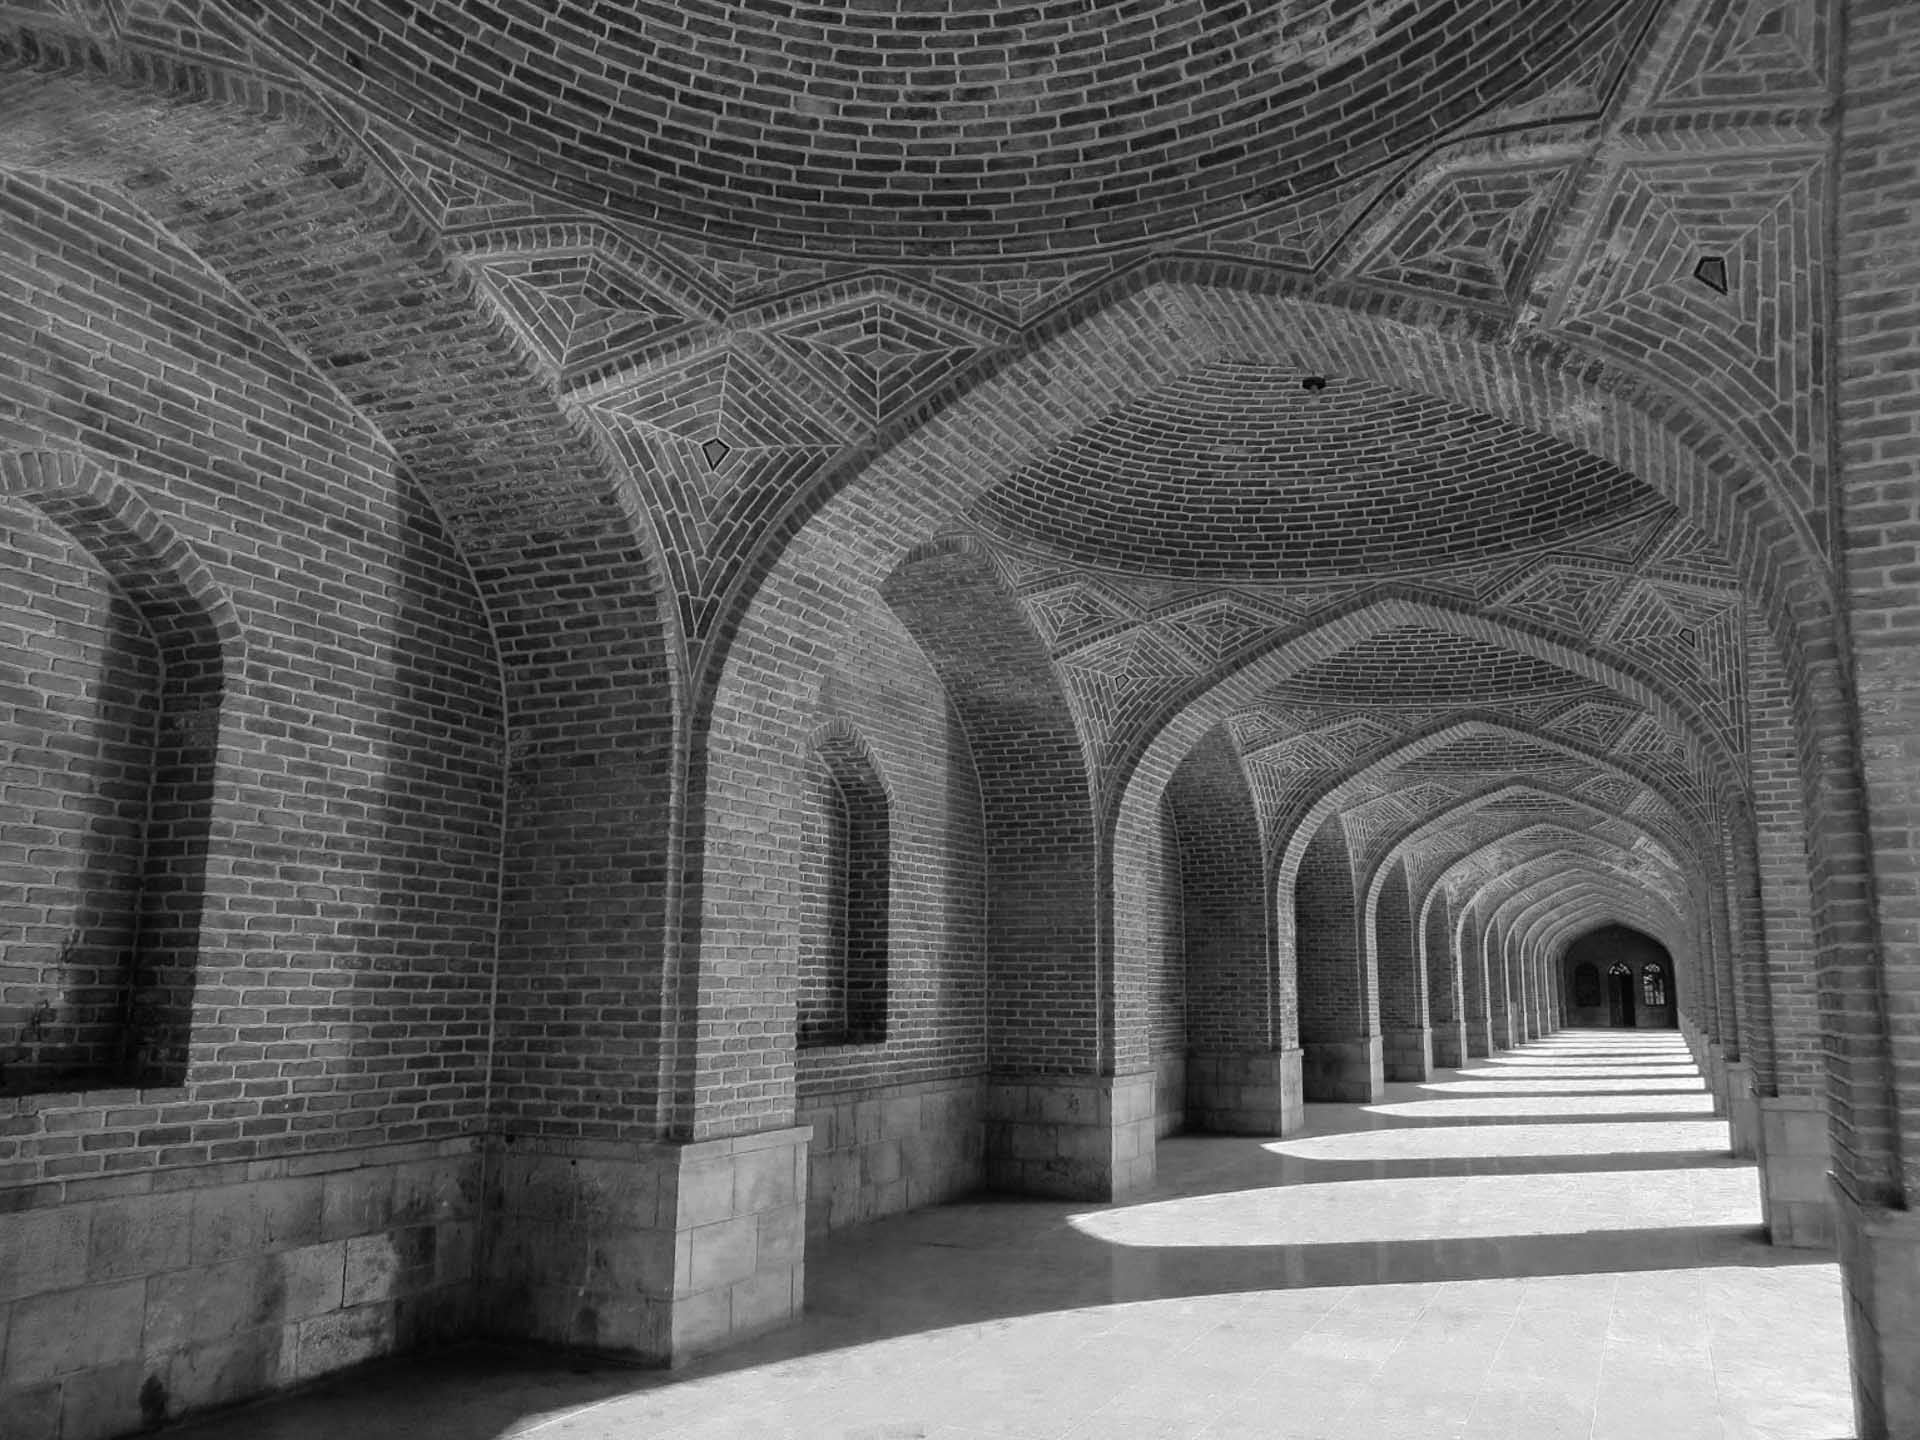 Black and white hall way outside a mosque in Iran